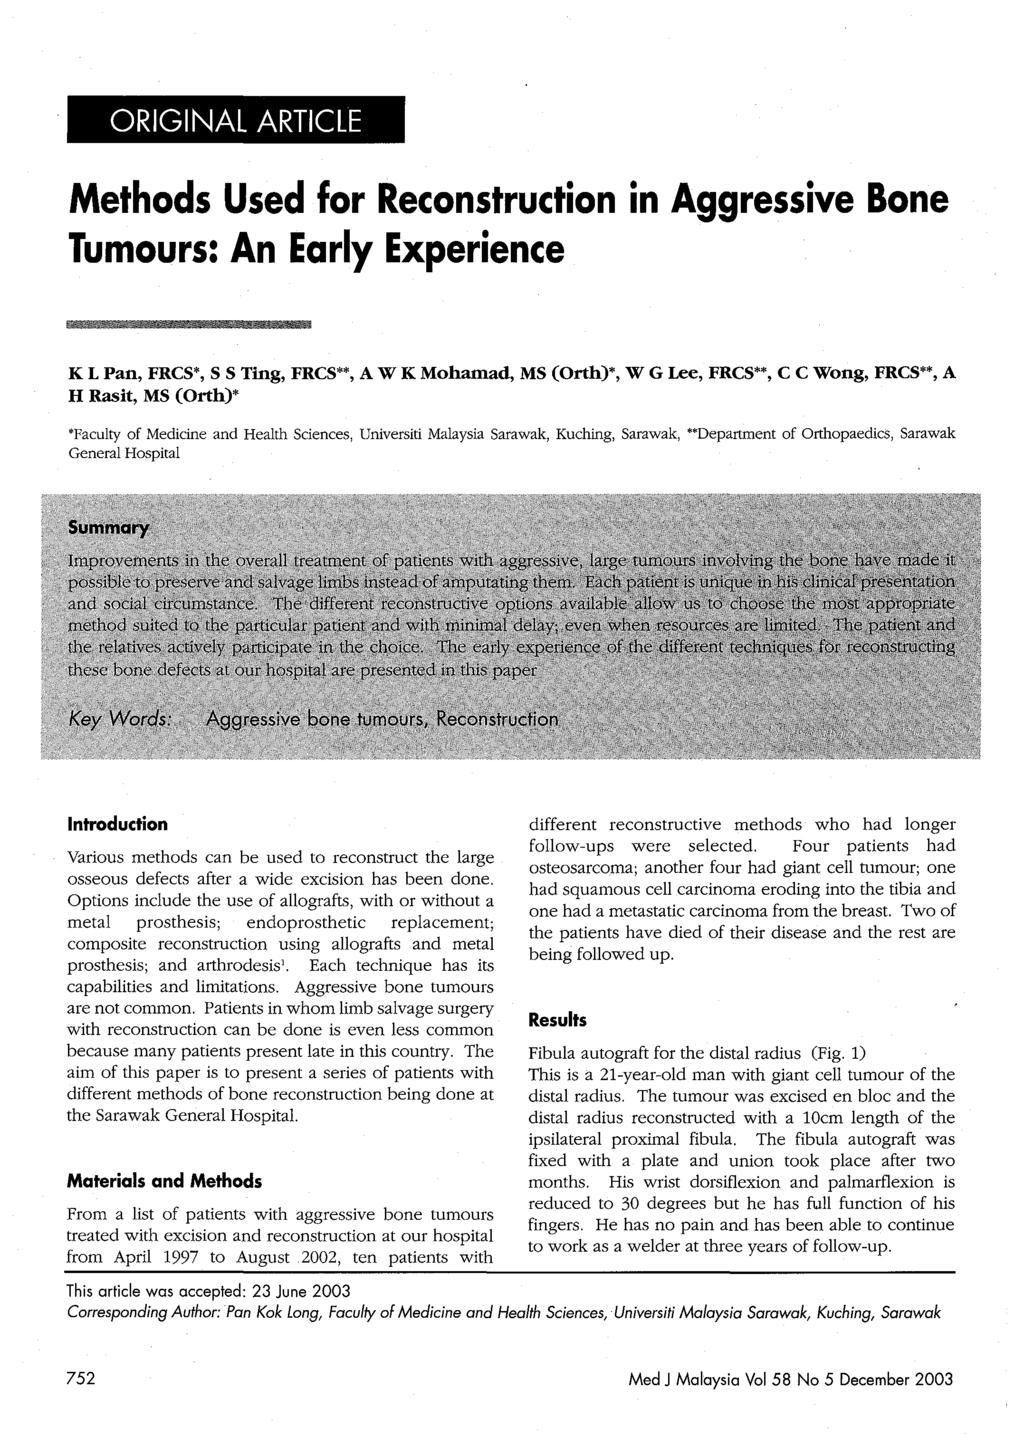 ORIGINAL ARTICLE Methods Used for Reconstruction in Aggressive Bone Tumours: An Early Experience K L Pan, FRCS*, S STing, FRCS**, A W K Mohamad, MS (Orth)*, W GLee, FRCS**, C C Wong, FRCS**, A H